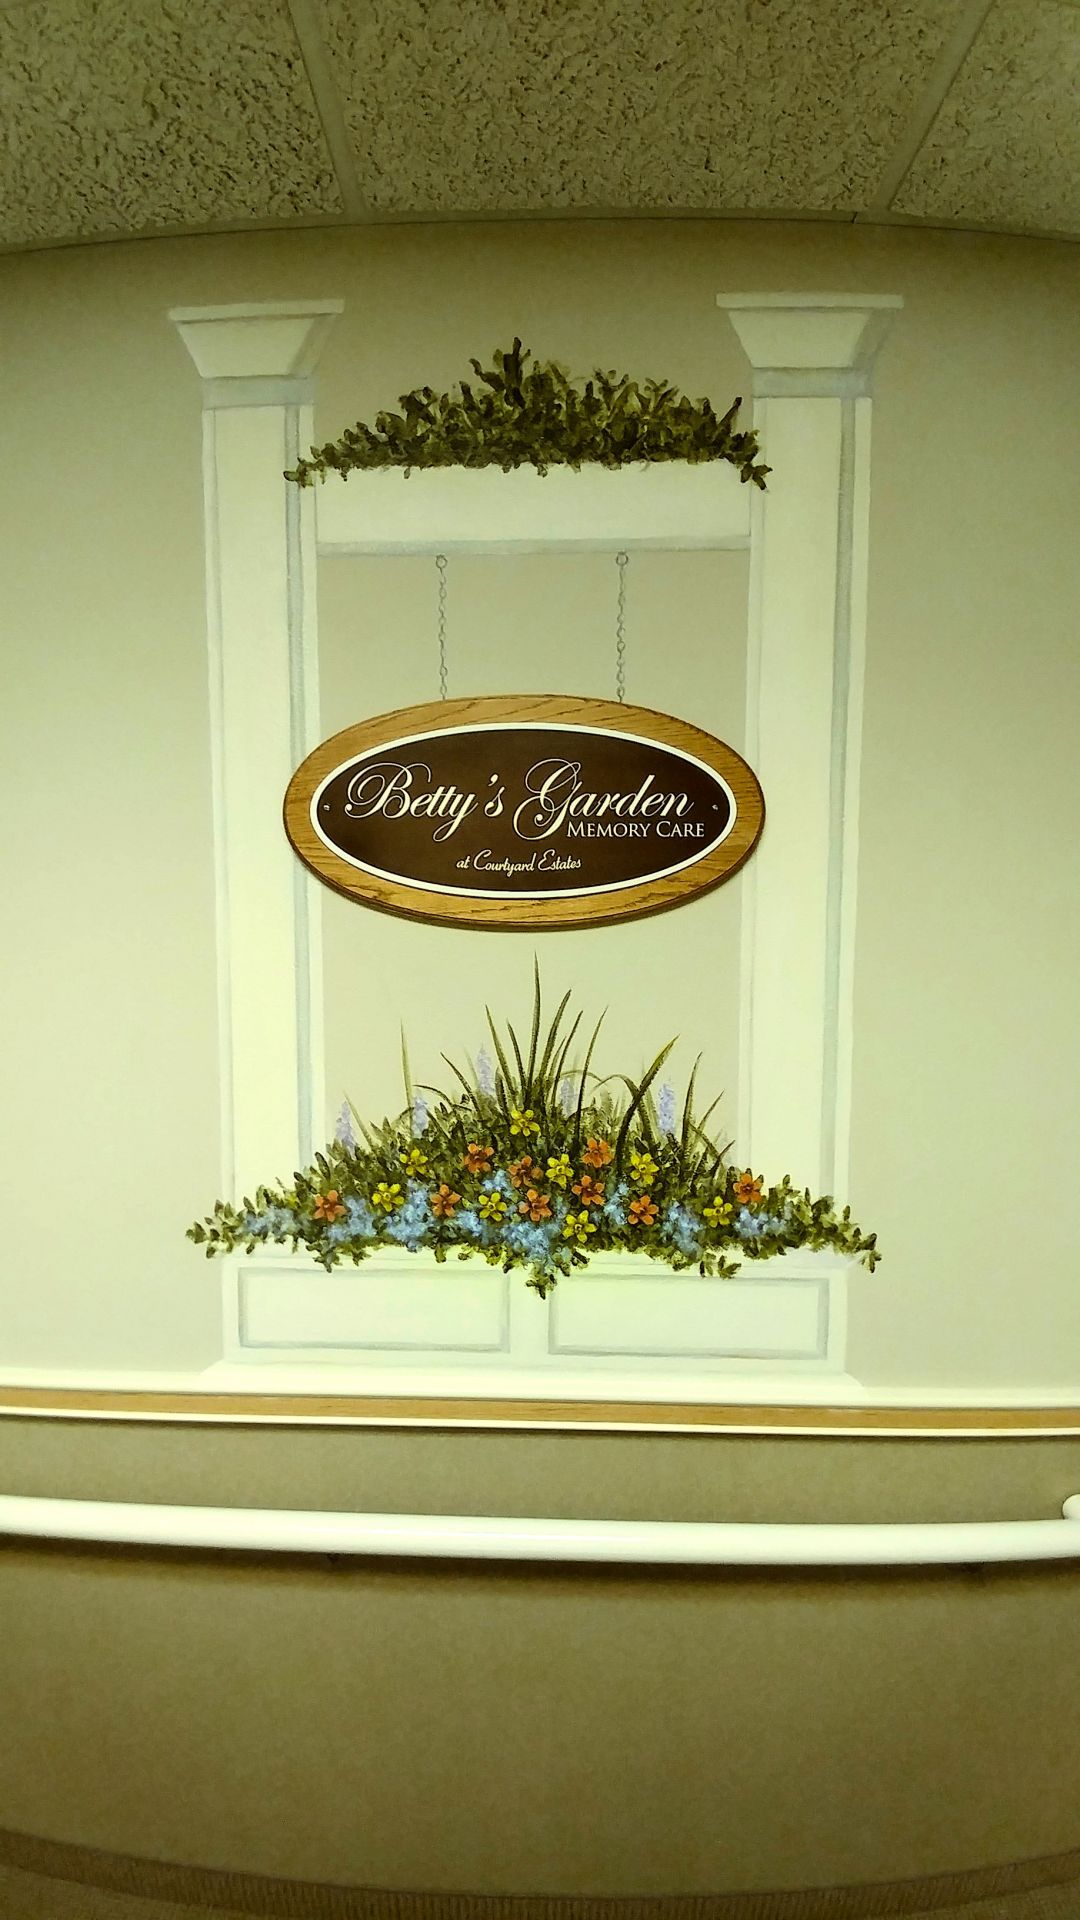 Senior living community, Courtyard Estates of Bushnell, featuring floral arrangements, art, and pottery.